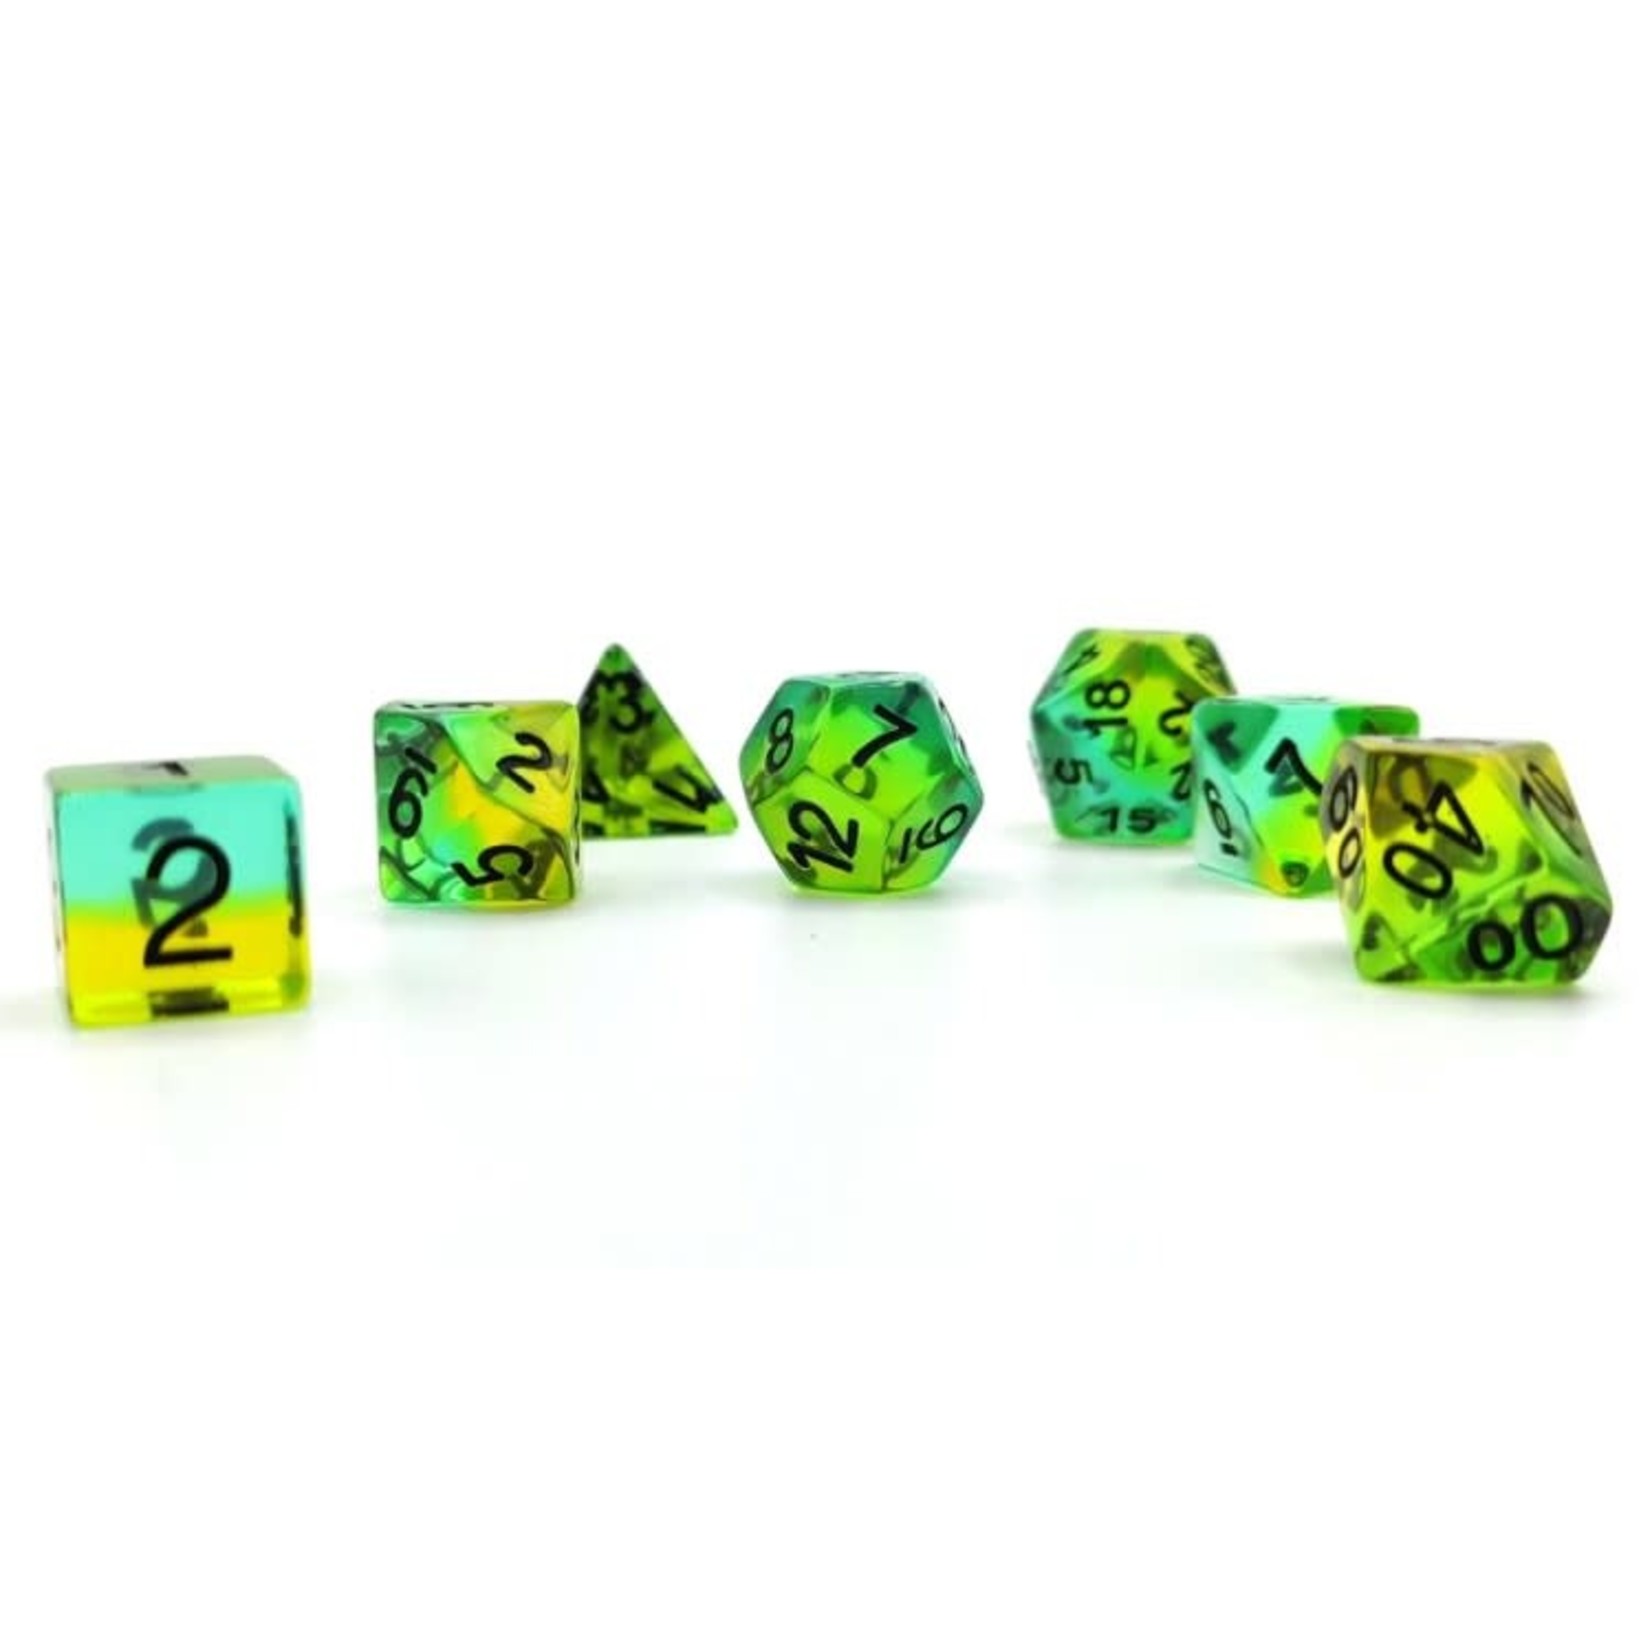 Sirius RPG Dice Mojito Translucent Green with Black Polyhedral 8 die set